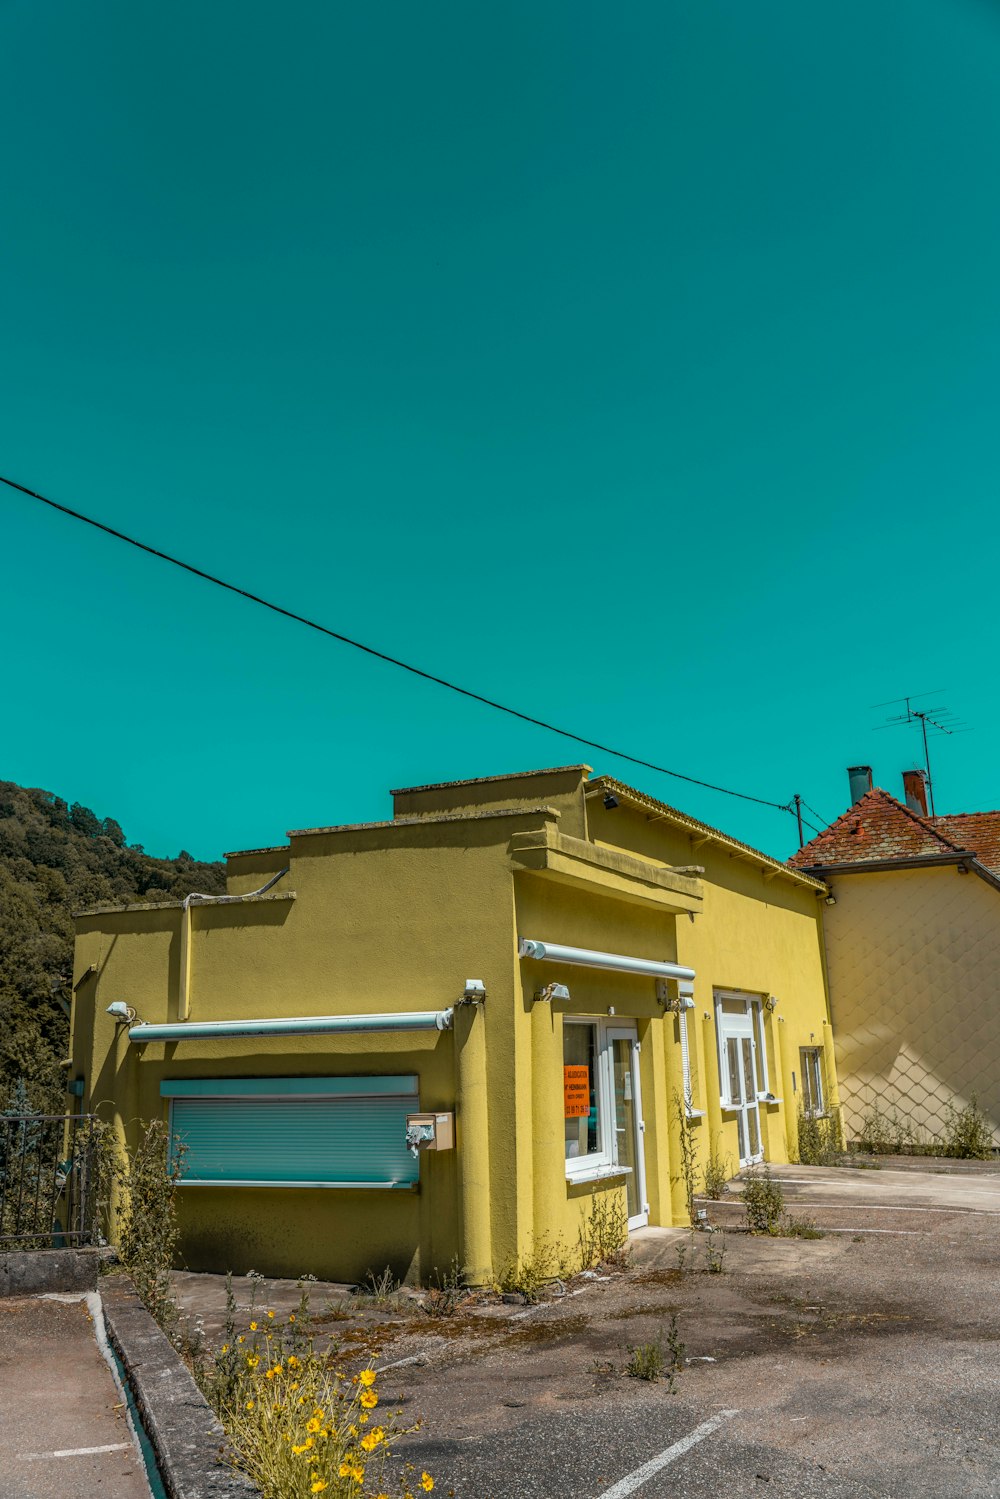 yellow concrete house under blue sky during daytime